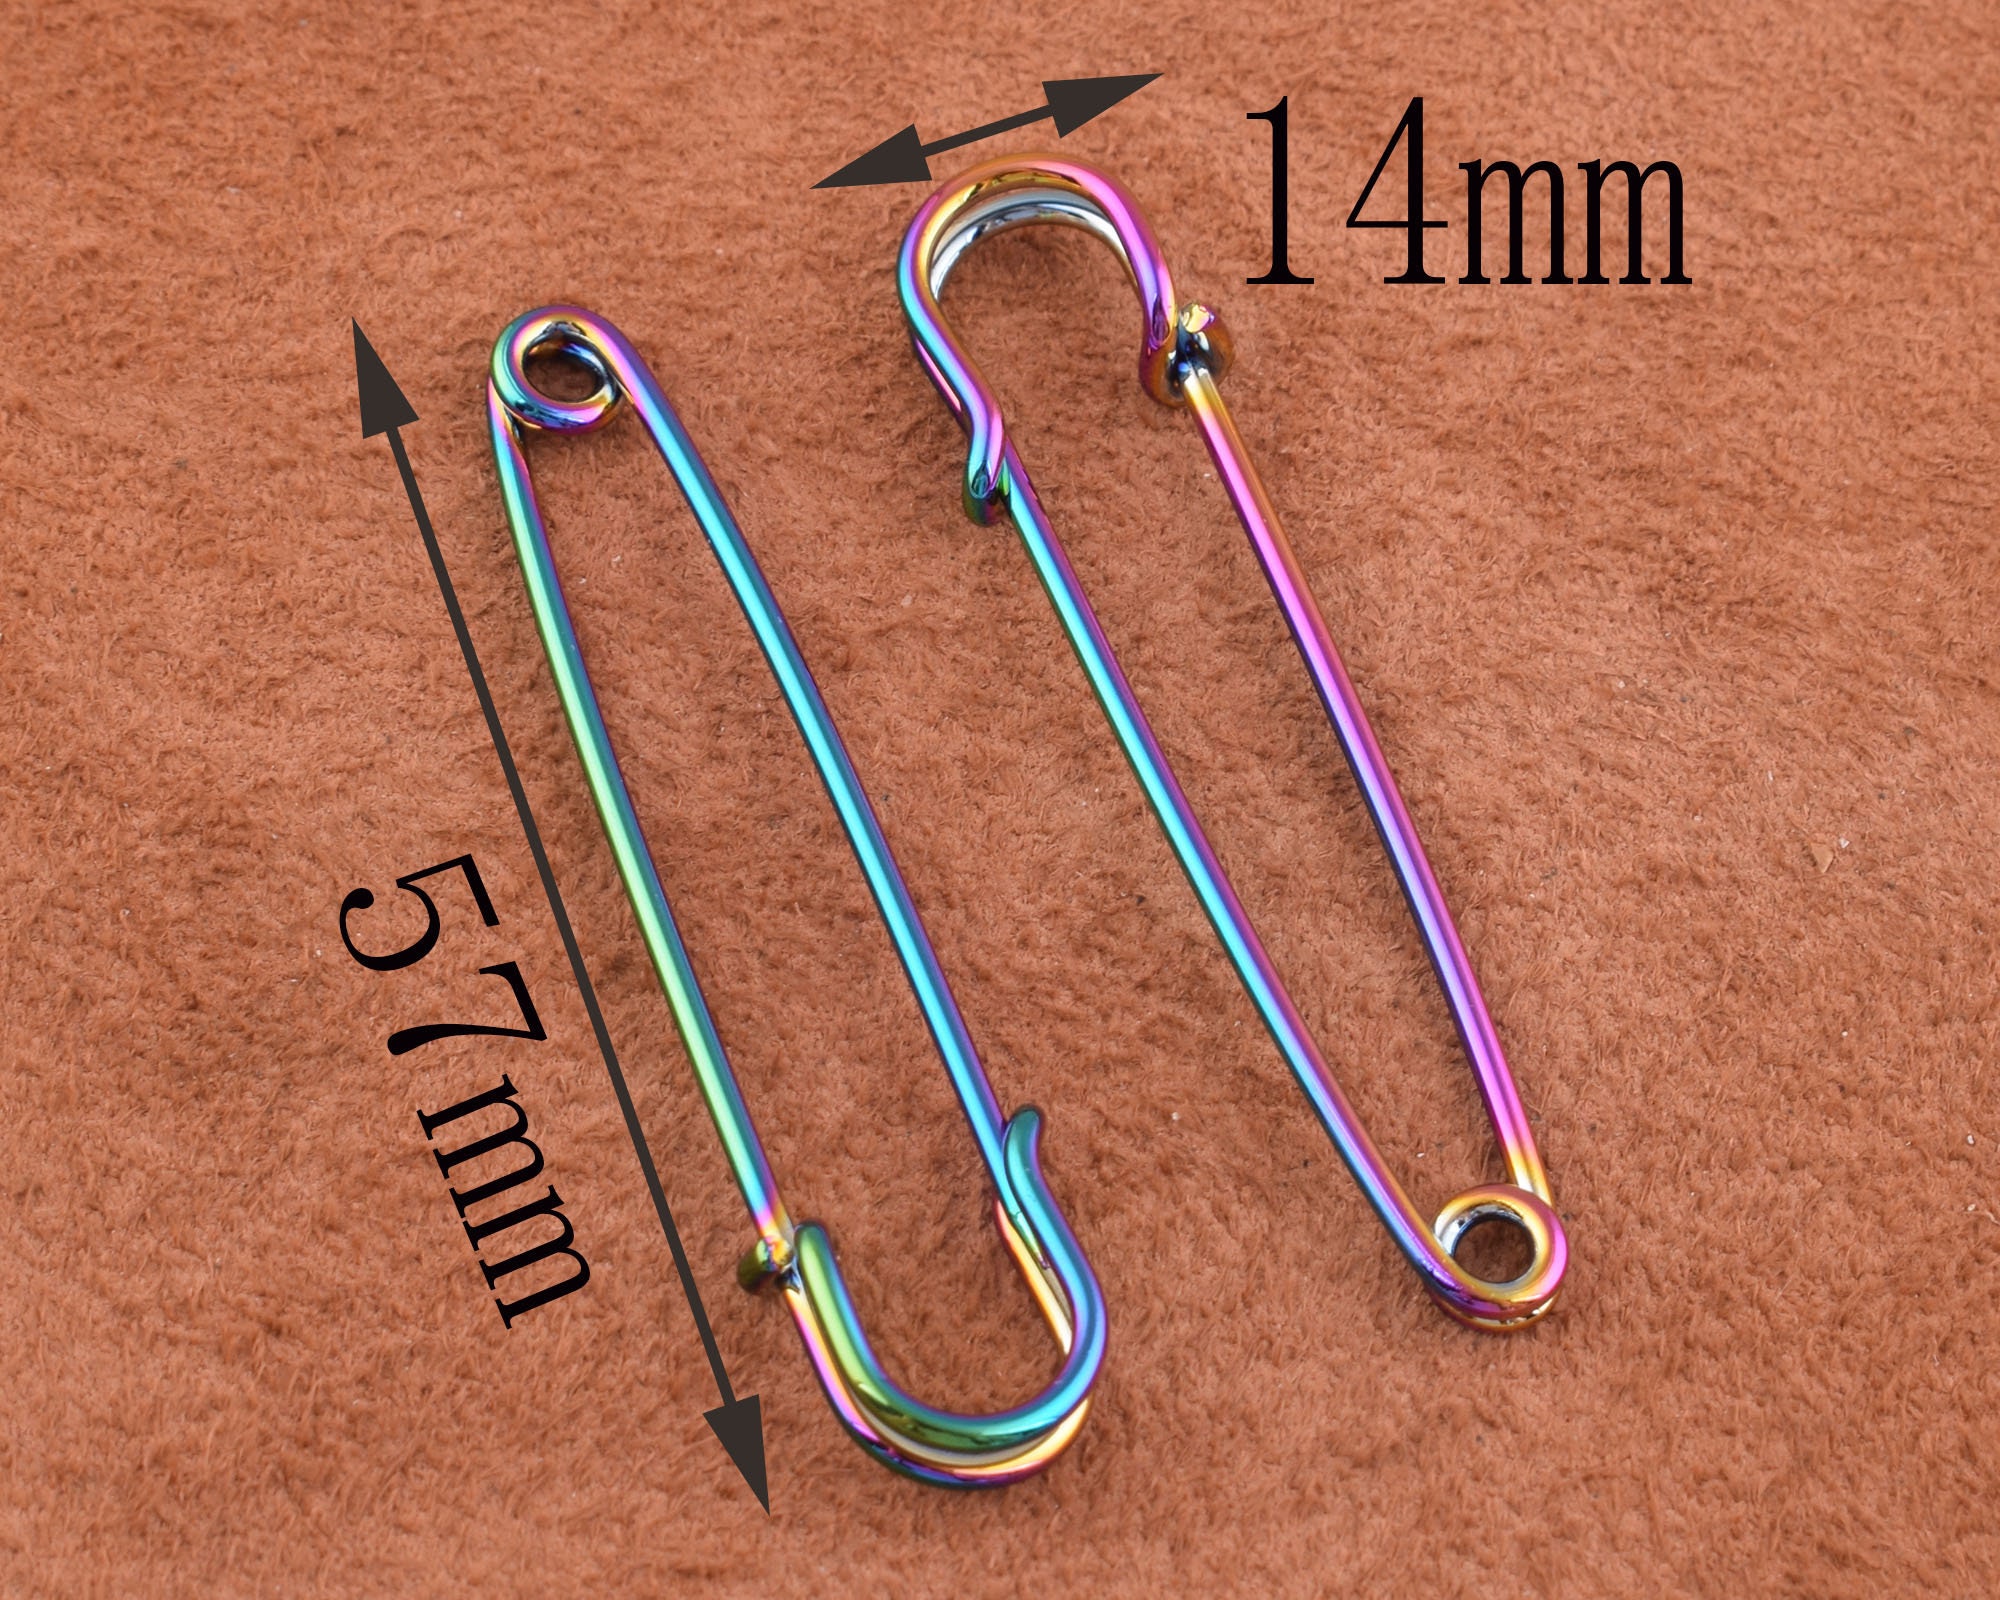 Rainbow Safety Pins 10pcs Colorful Charming Safety Pins Metal